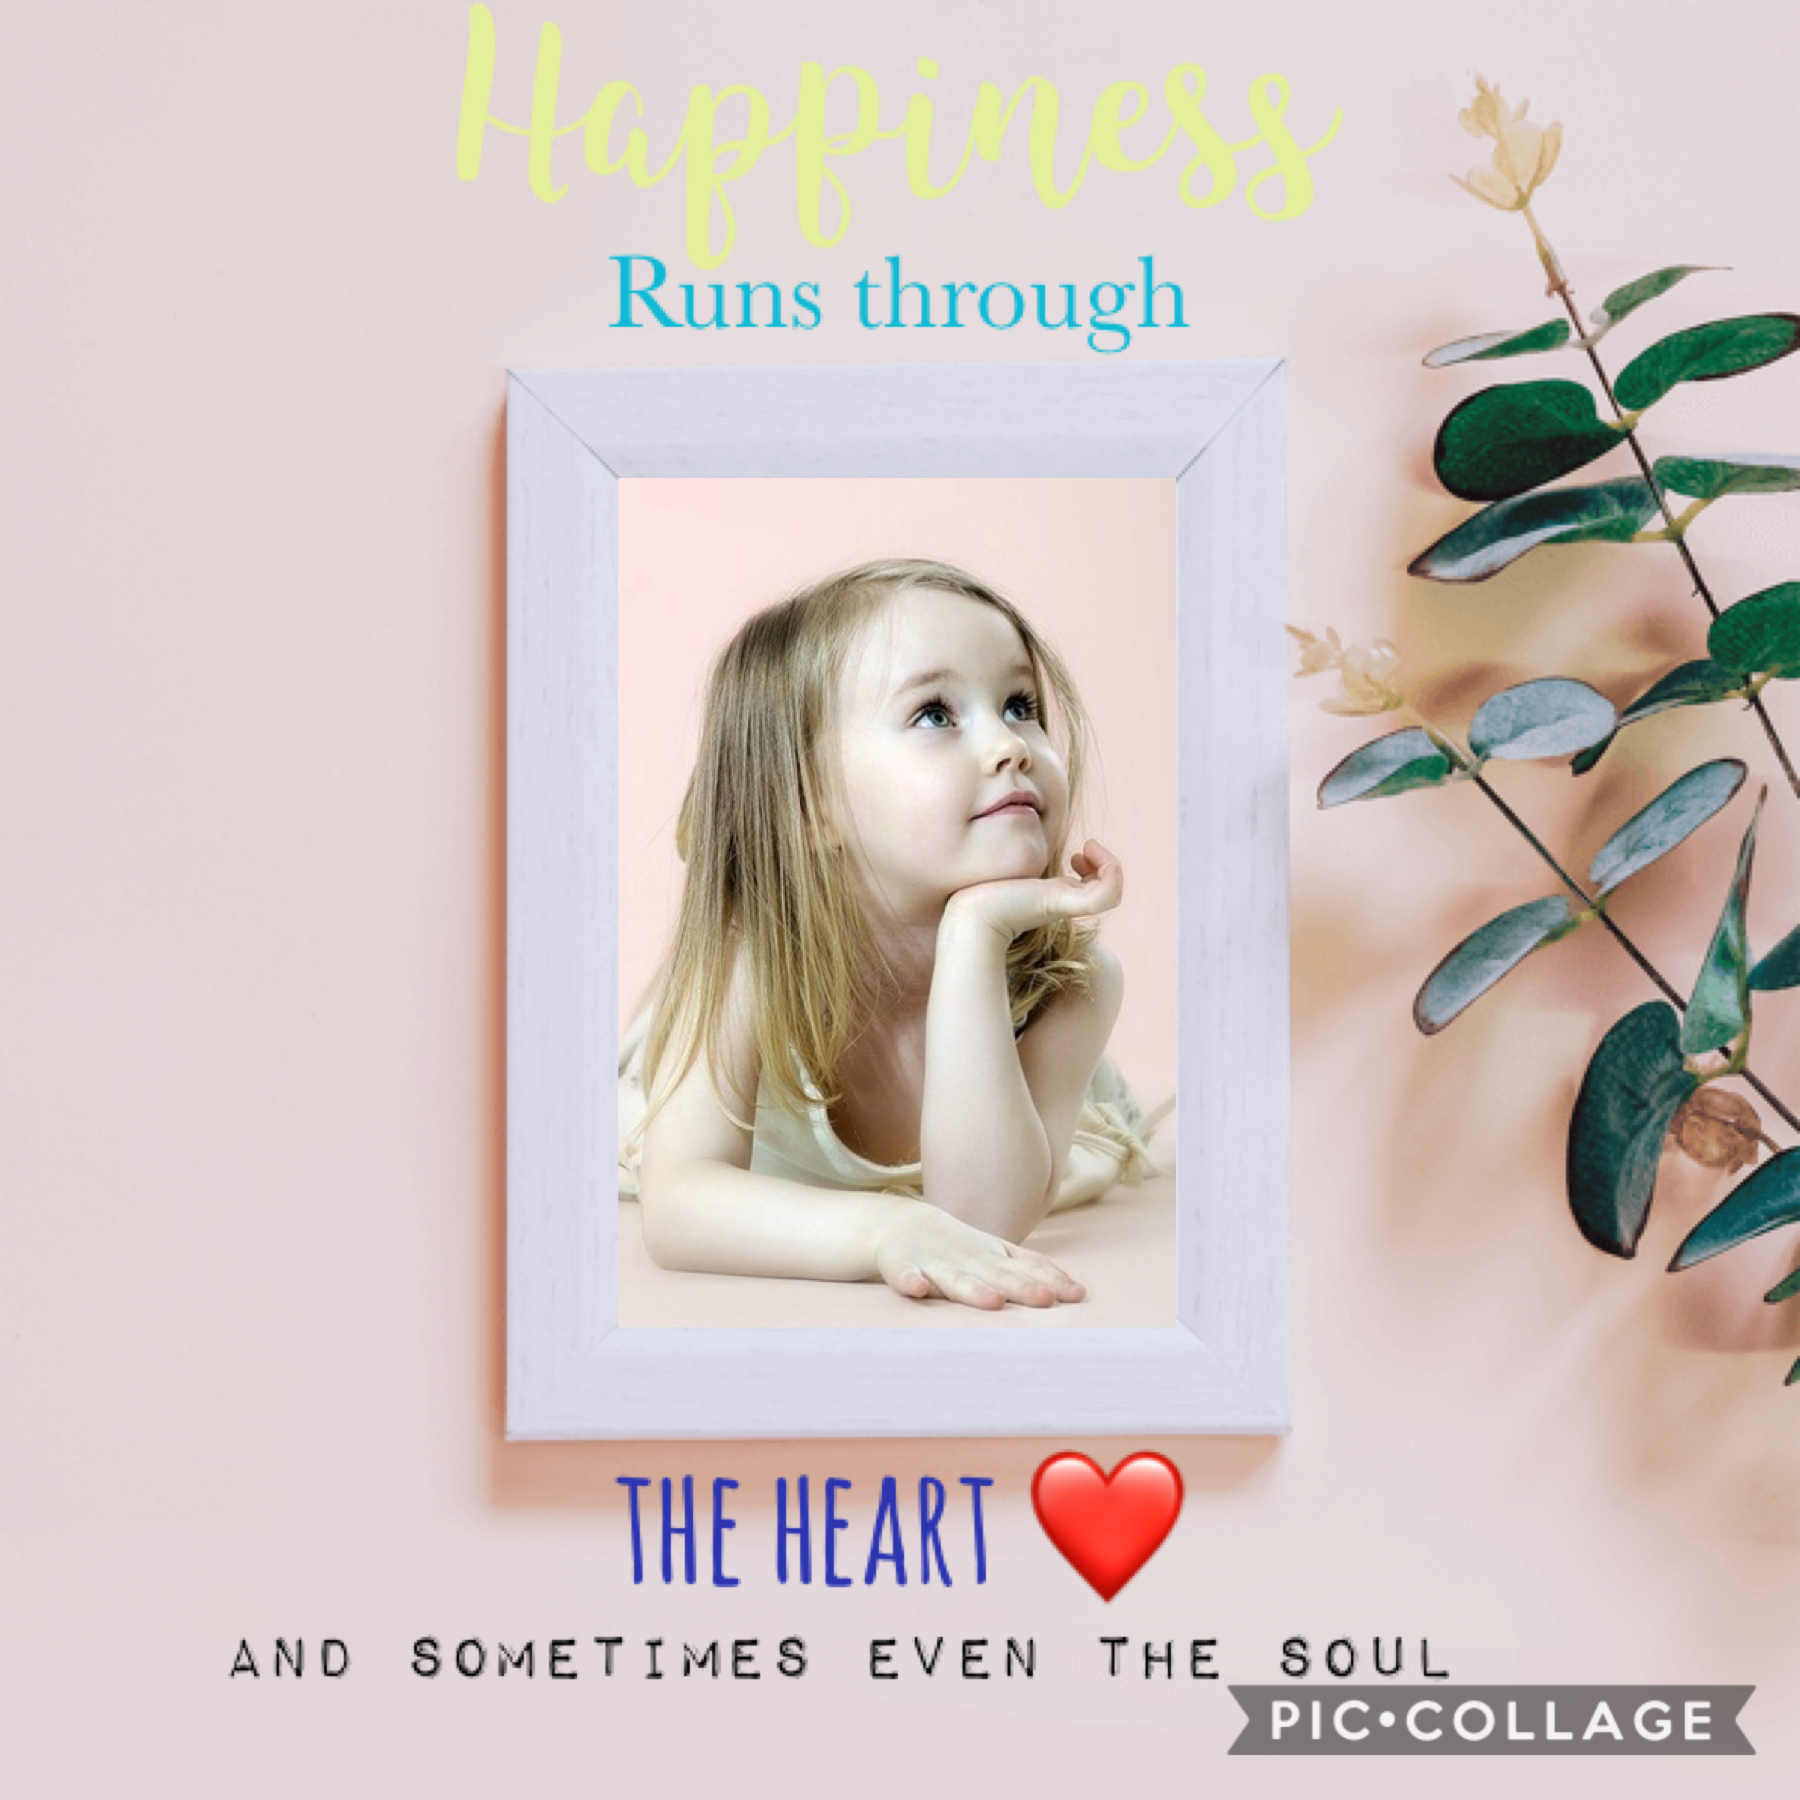 Happiness runs through the heart and sometimes even the SOUL 💕
